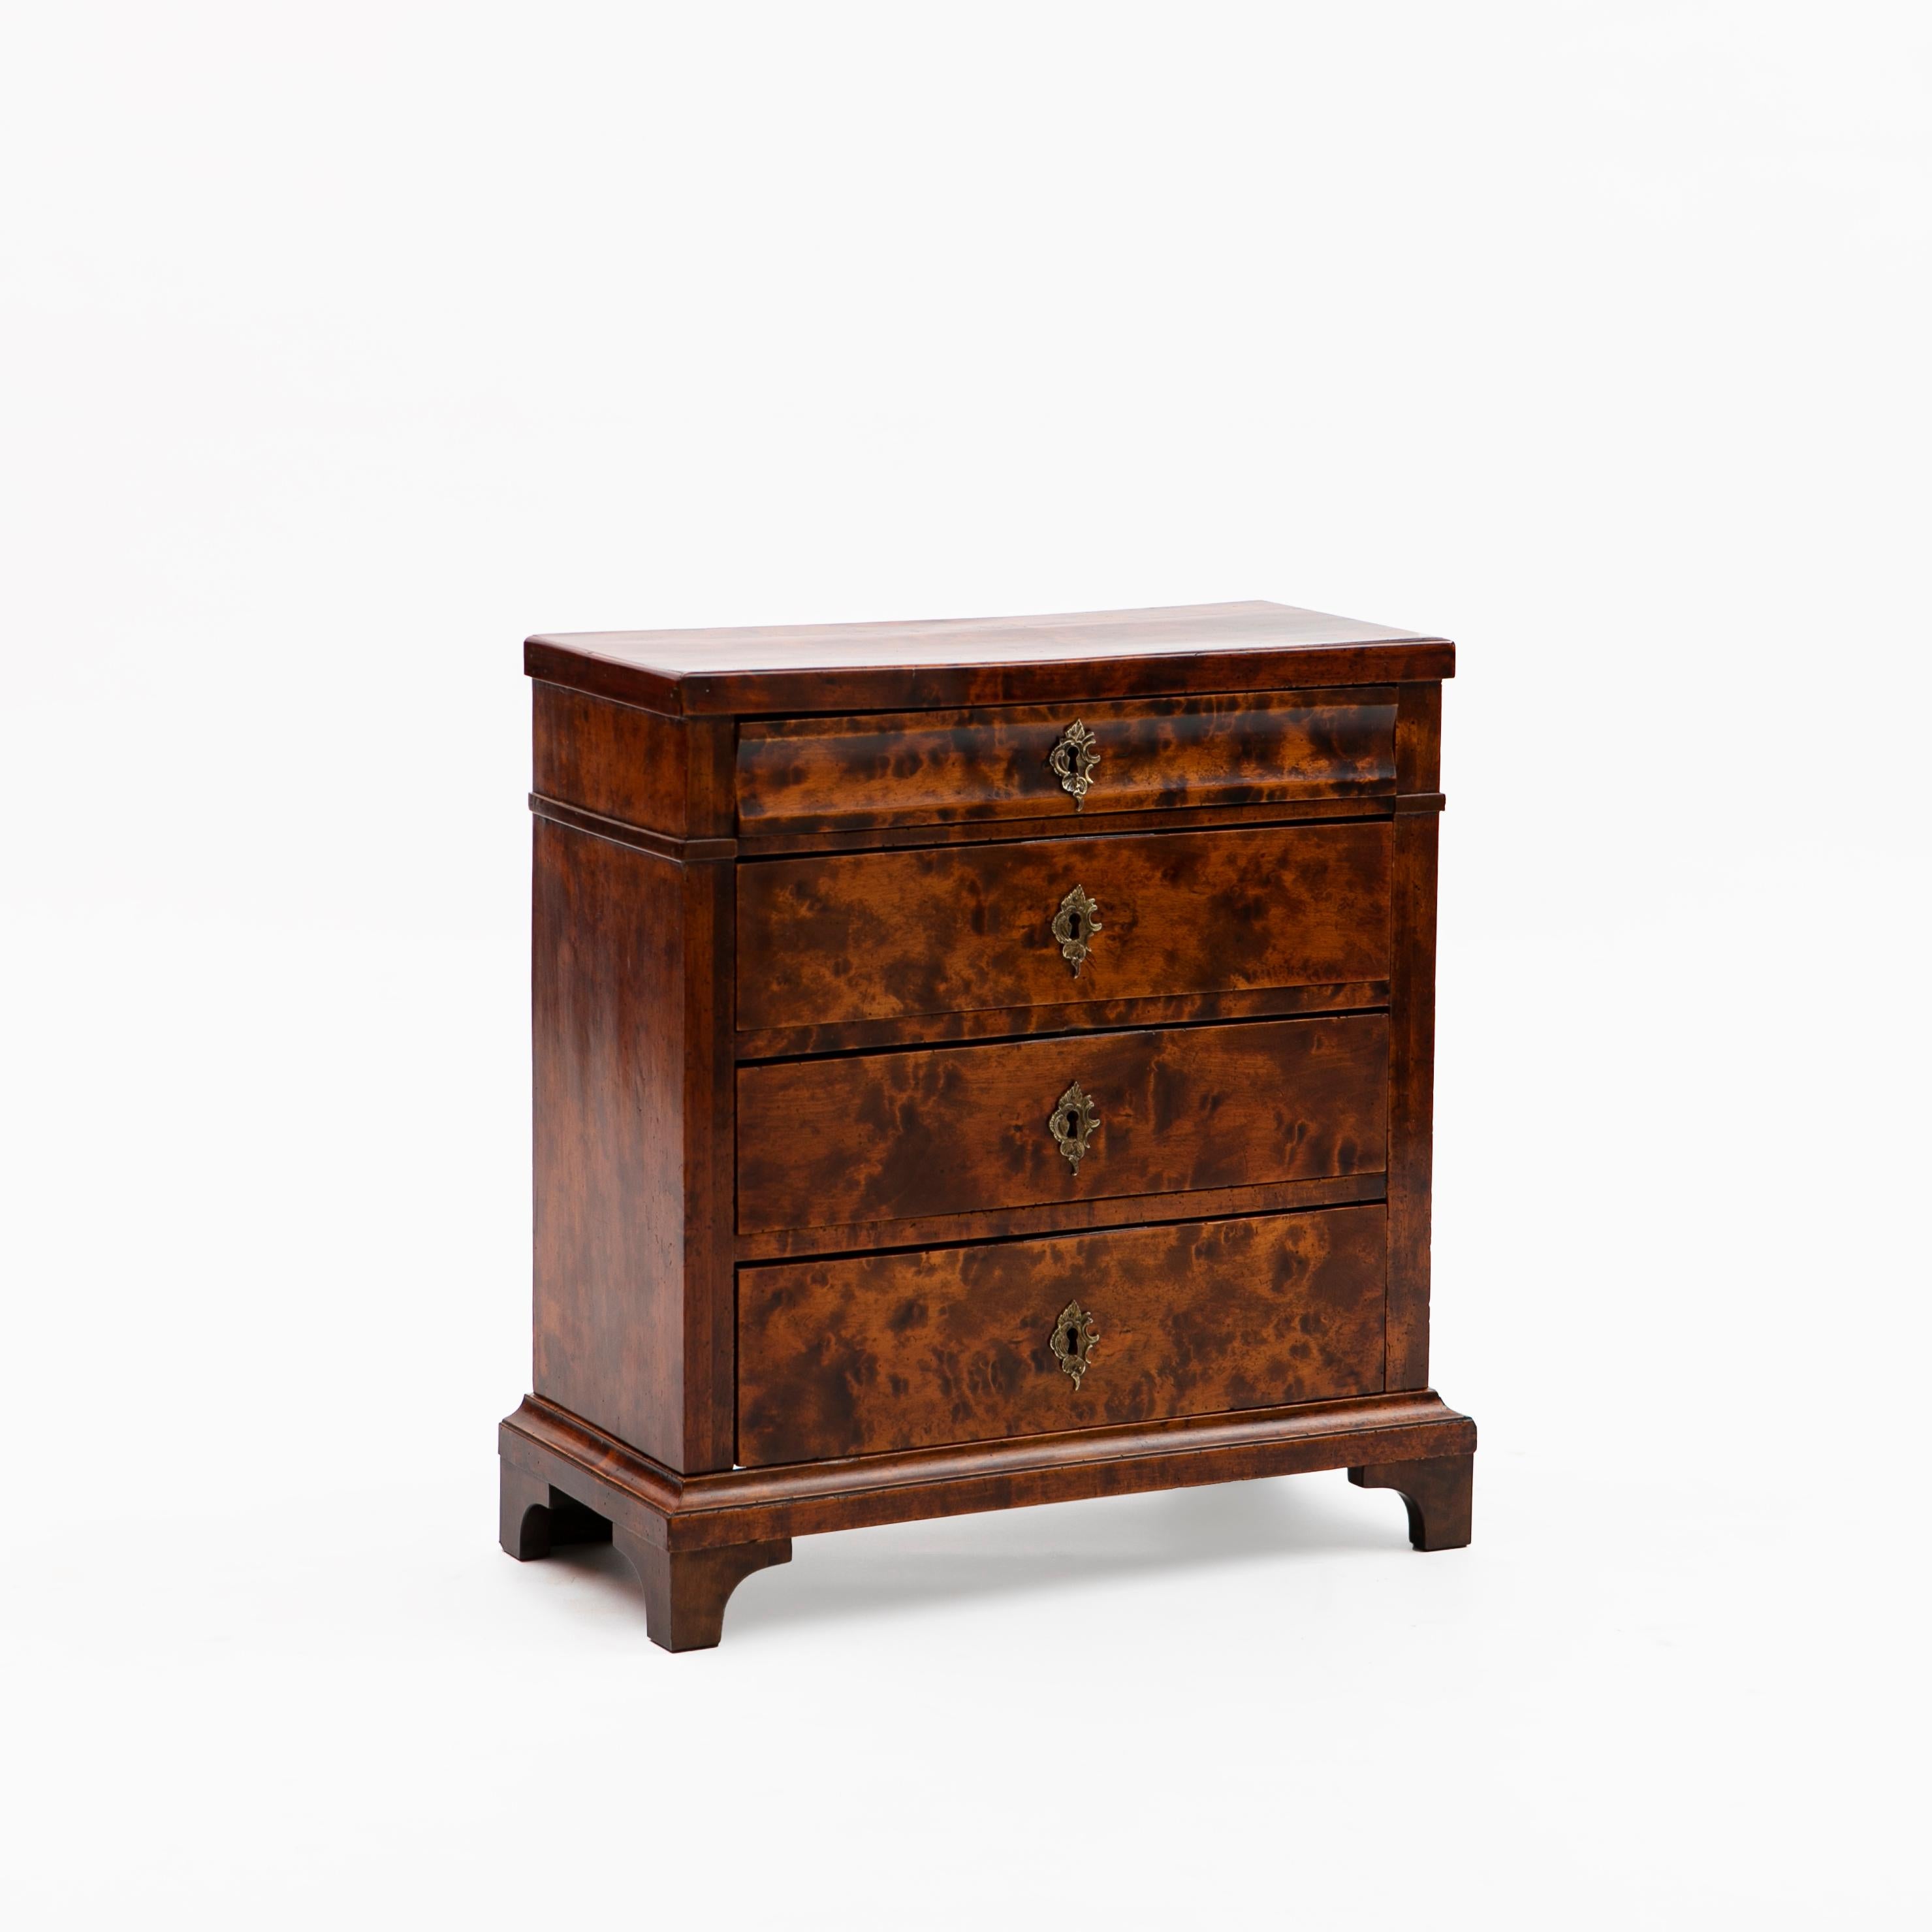 Small 19th century Danish Late Empire chest of drawers in flamed birch. French polished.
The façade showcases an arrangement of four drawers (a smaller drawer over 3 larger drawers) standing on a base with bracket feet.
Denmark 1820-1830.